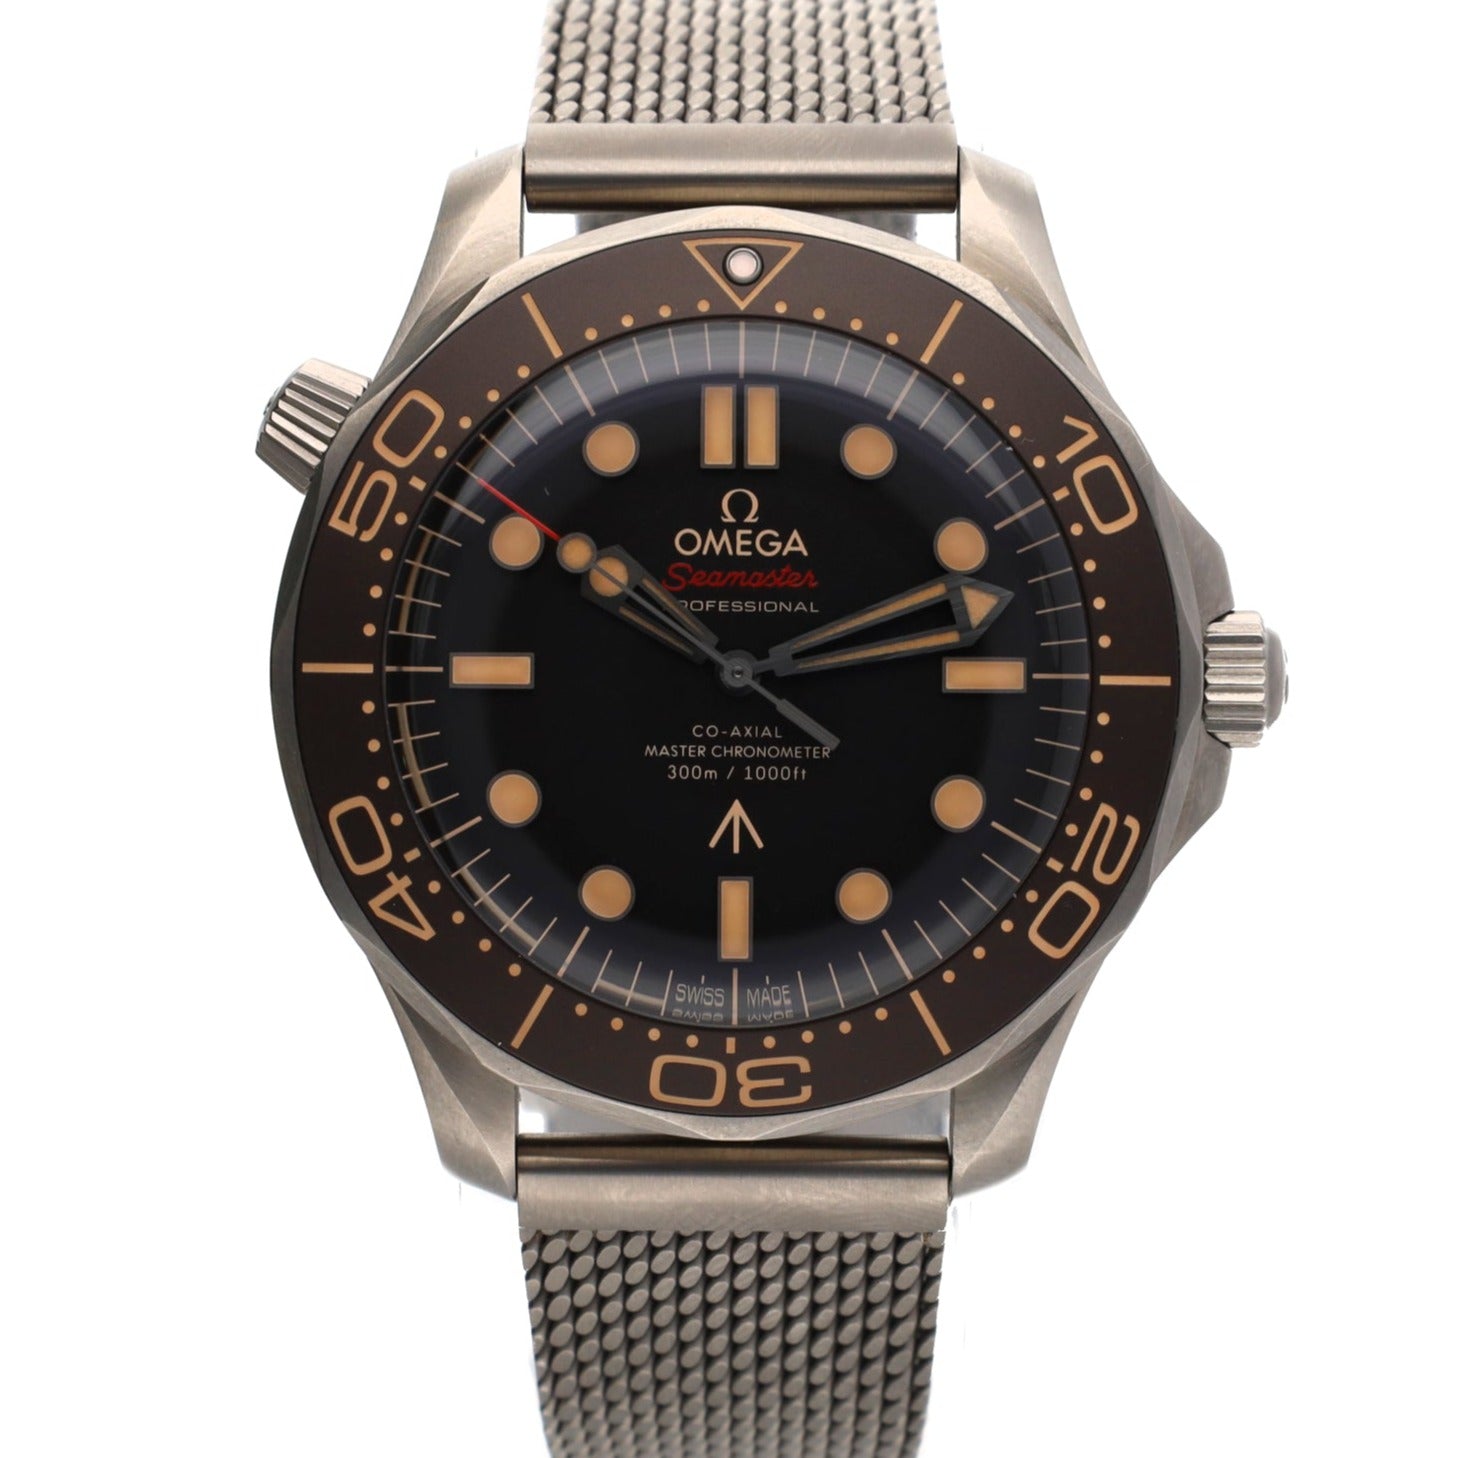 Omega Seamaster Co-Axial Master Chronometer 007 Diver 300M Titanium Watch with Box and Papers